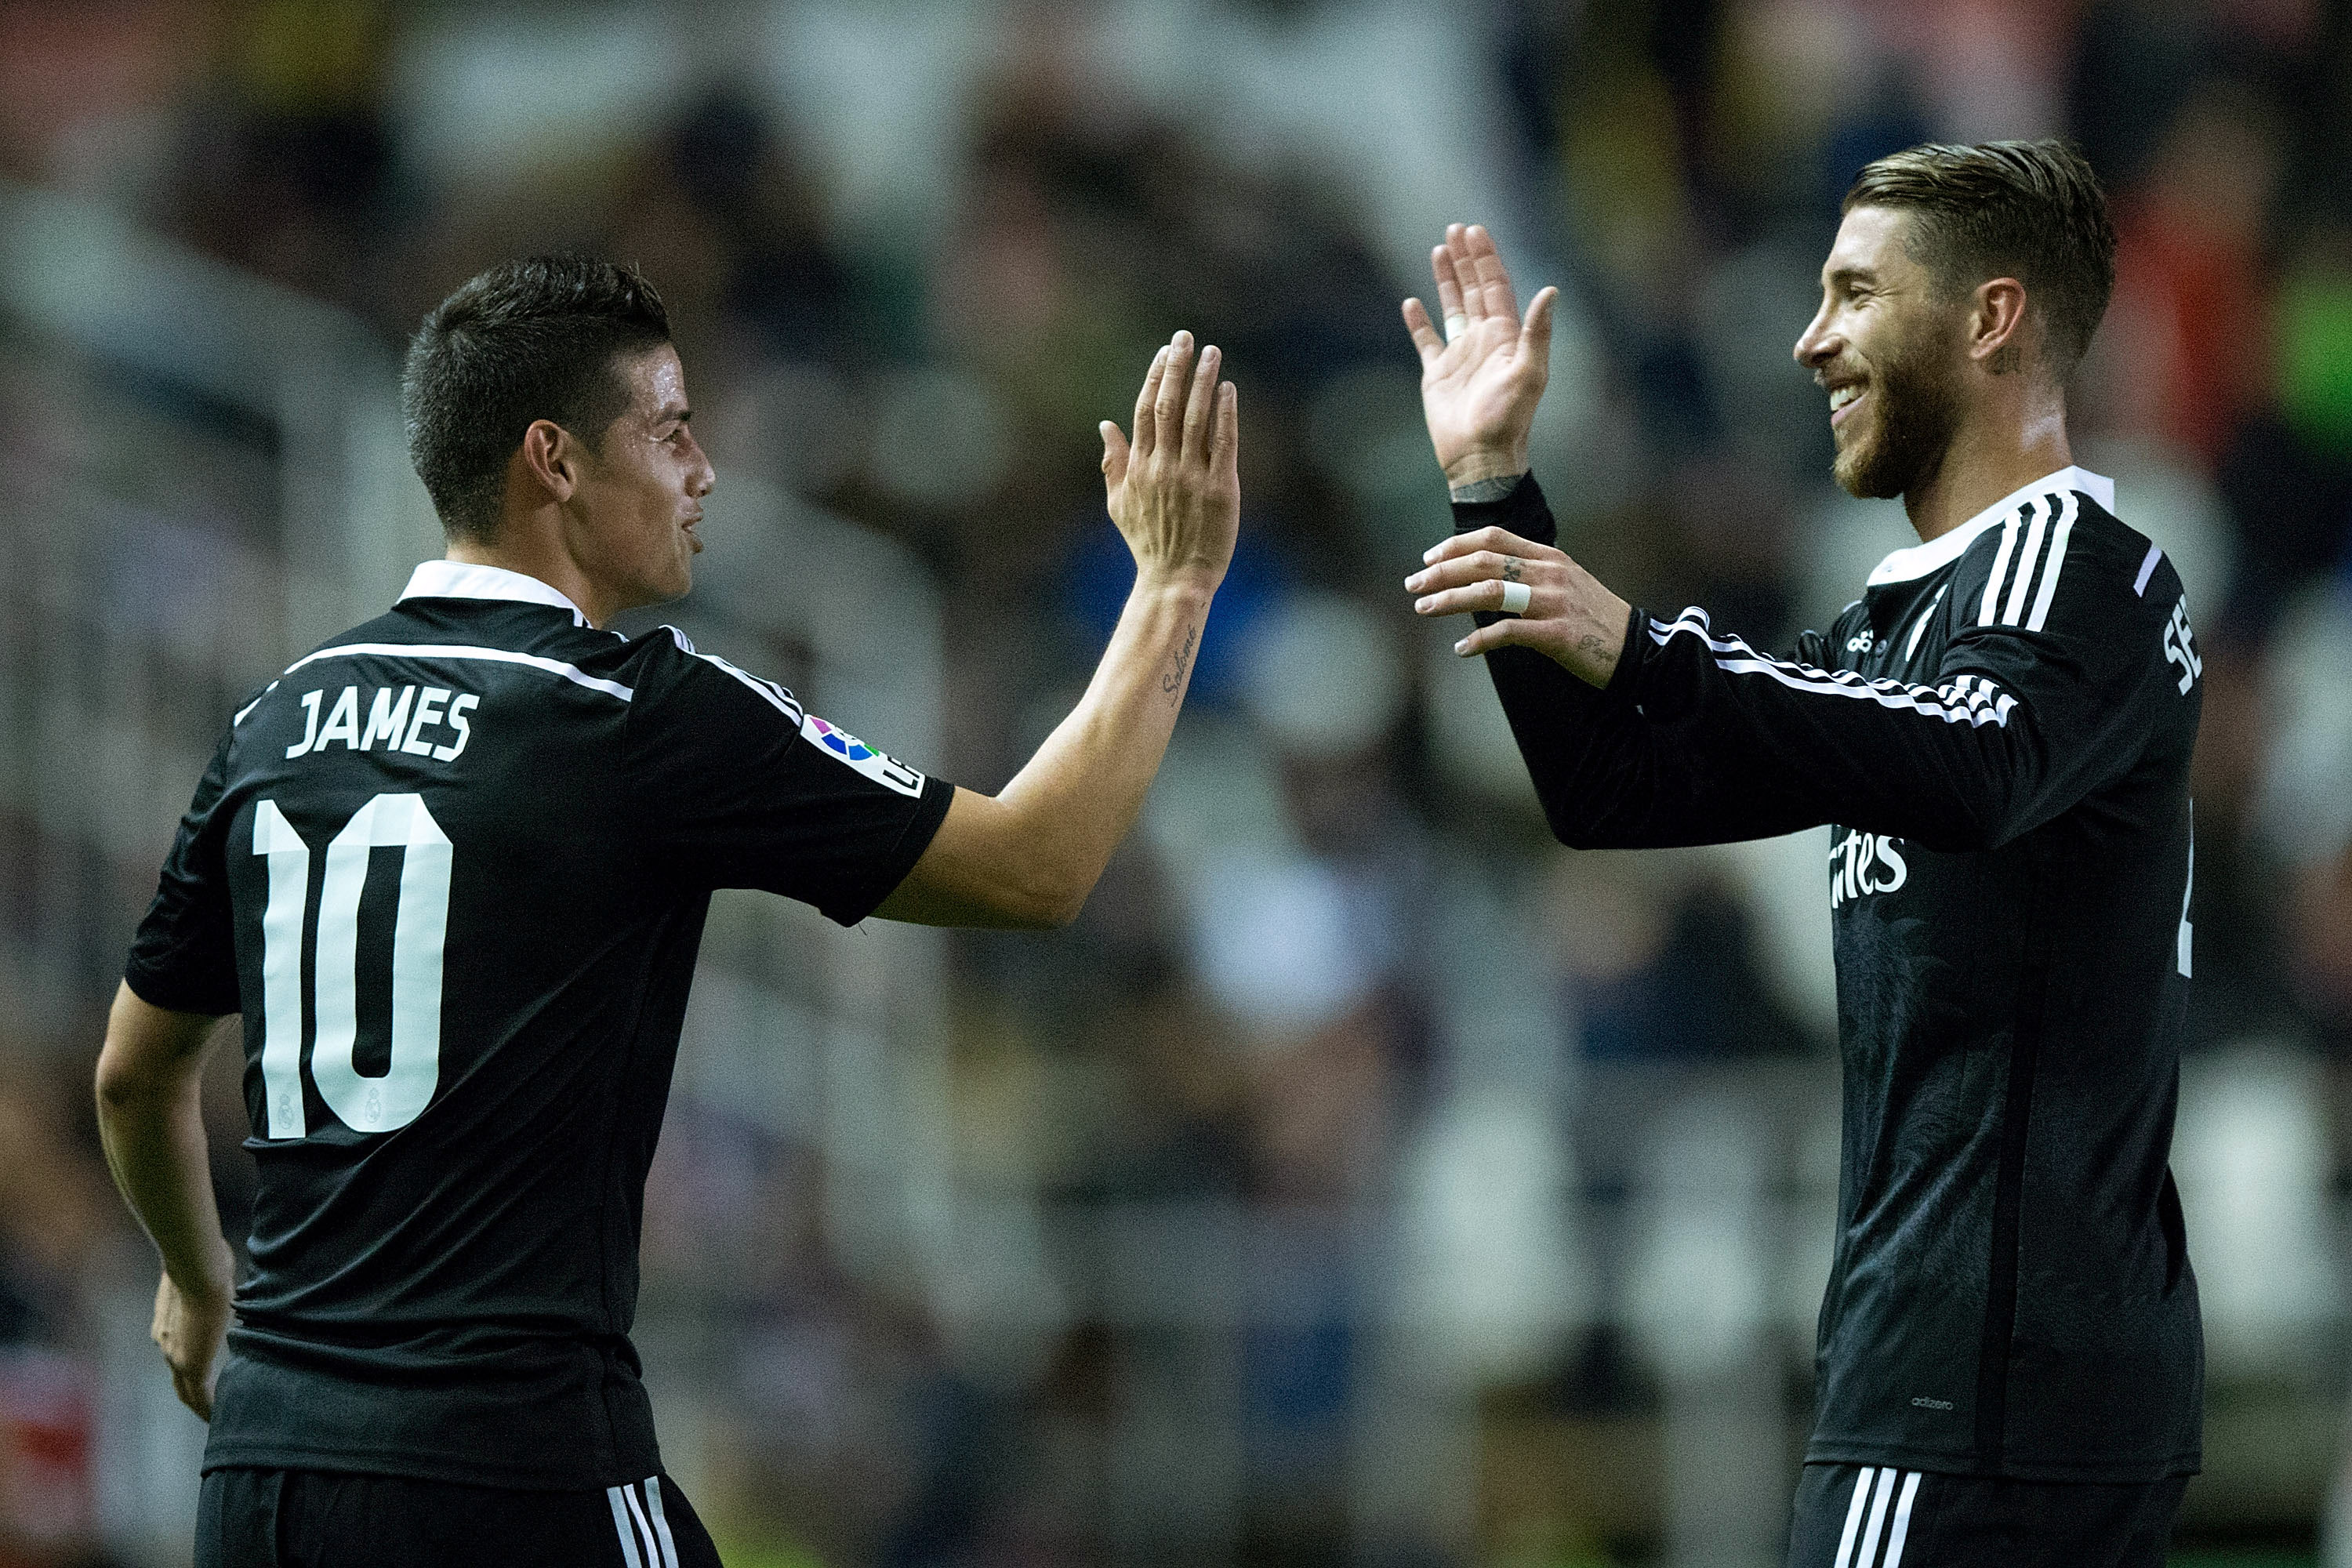 MADRID, SPAIN - APRIL 08:  James Rodriguez (L) of Real Madrid CF celebrates scoring their second goal Sergio Ramos (R) during the La Liga match between Rayo Vallecano de Madrid and Real Madrid CF at Vallecas Stadium on April 8, 2015 in Madrid, Spain.  (Photo by Gonzalo Arroyo Moreno/Getty Images)